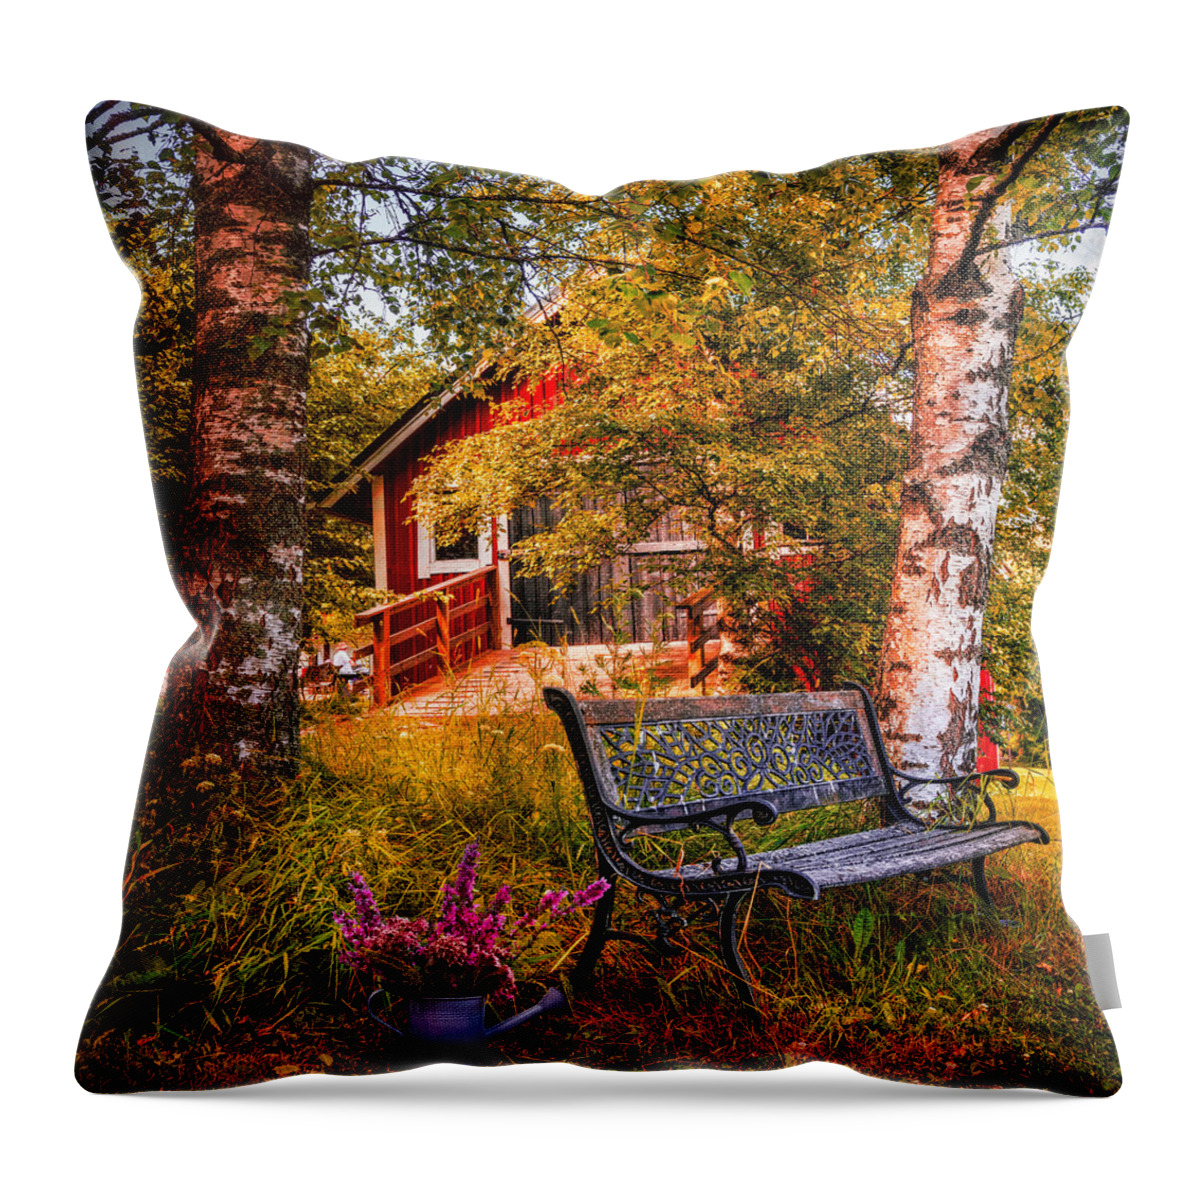 Appalachia Throw Pillow featuring the photograph Come Back Home on an Autumn Afternoon by Debra and Dave Vanderlaan